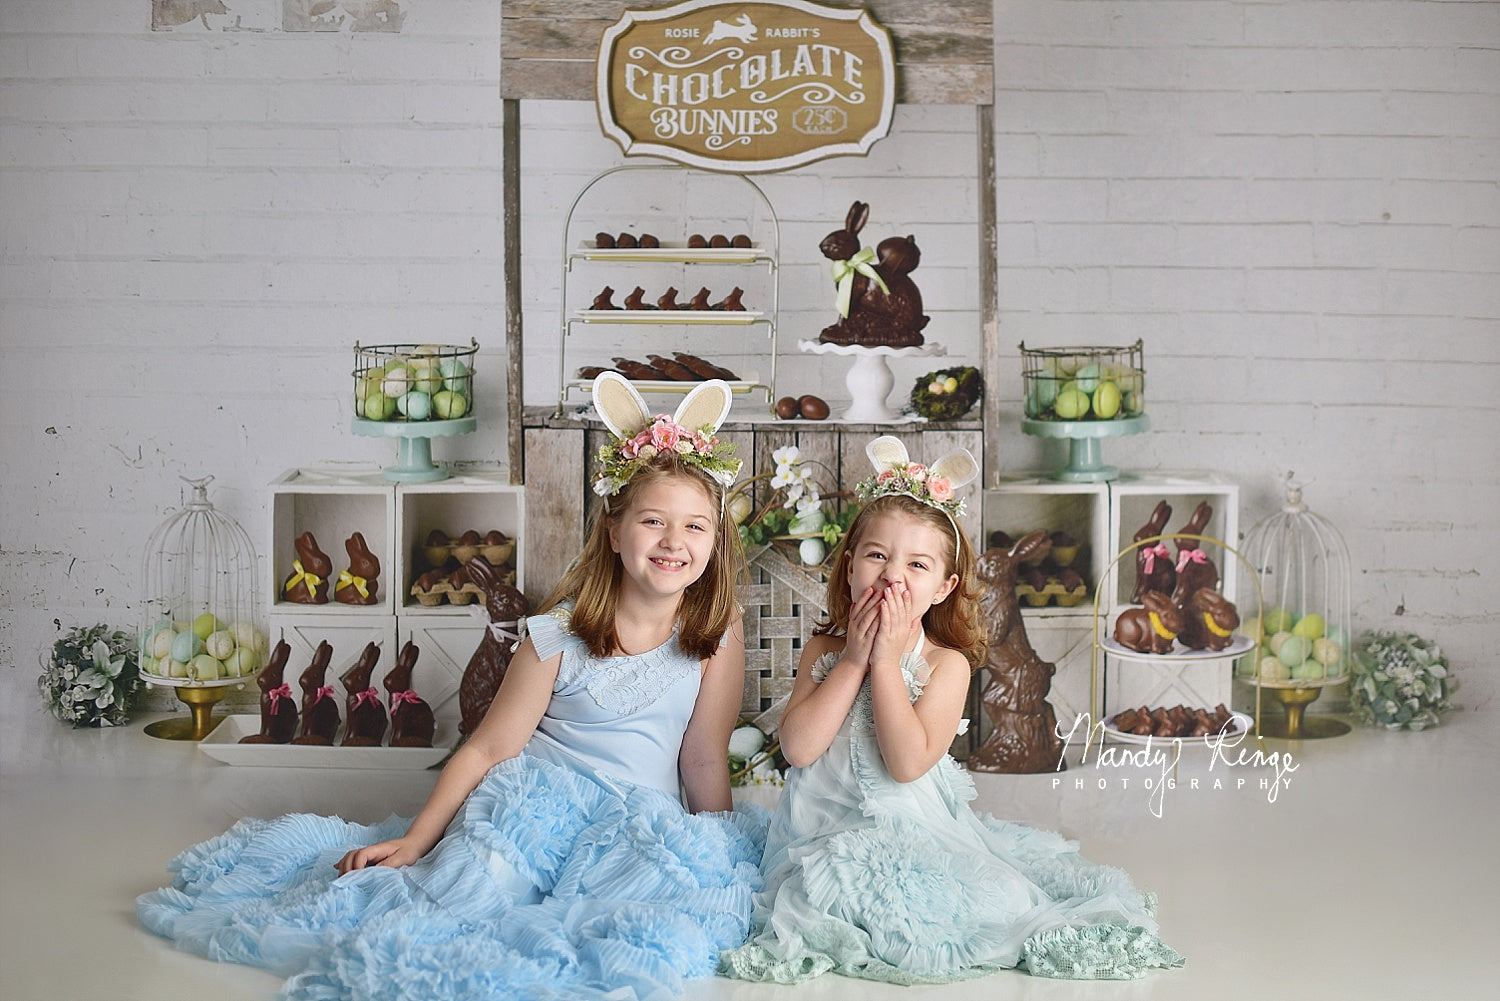 Kate Easter Chocolate Bunnies Backdrop Designed by Mandy Ringe Photography